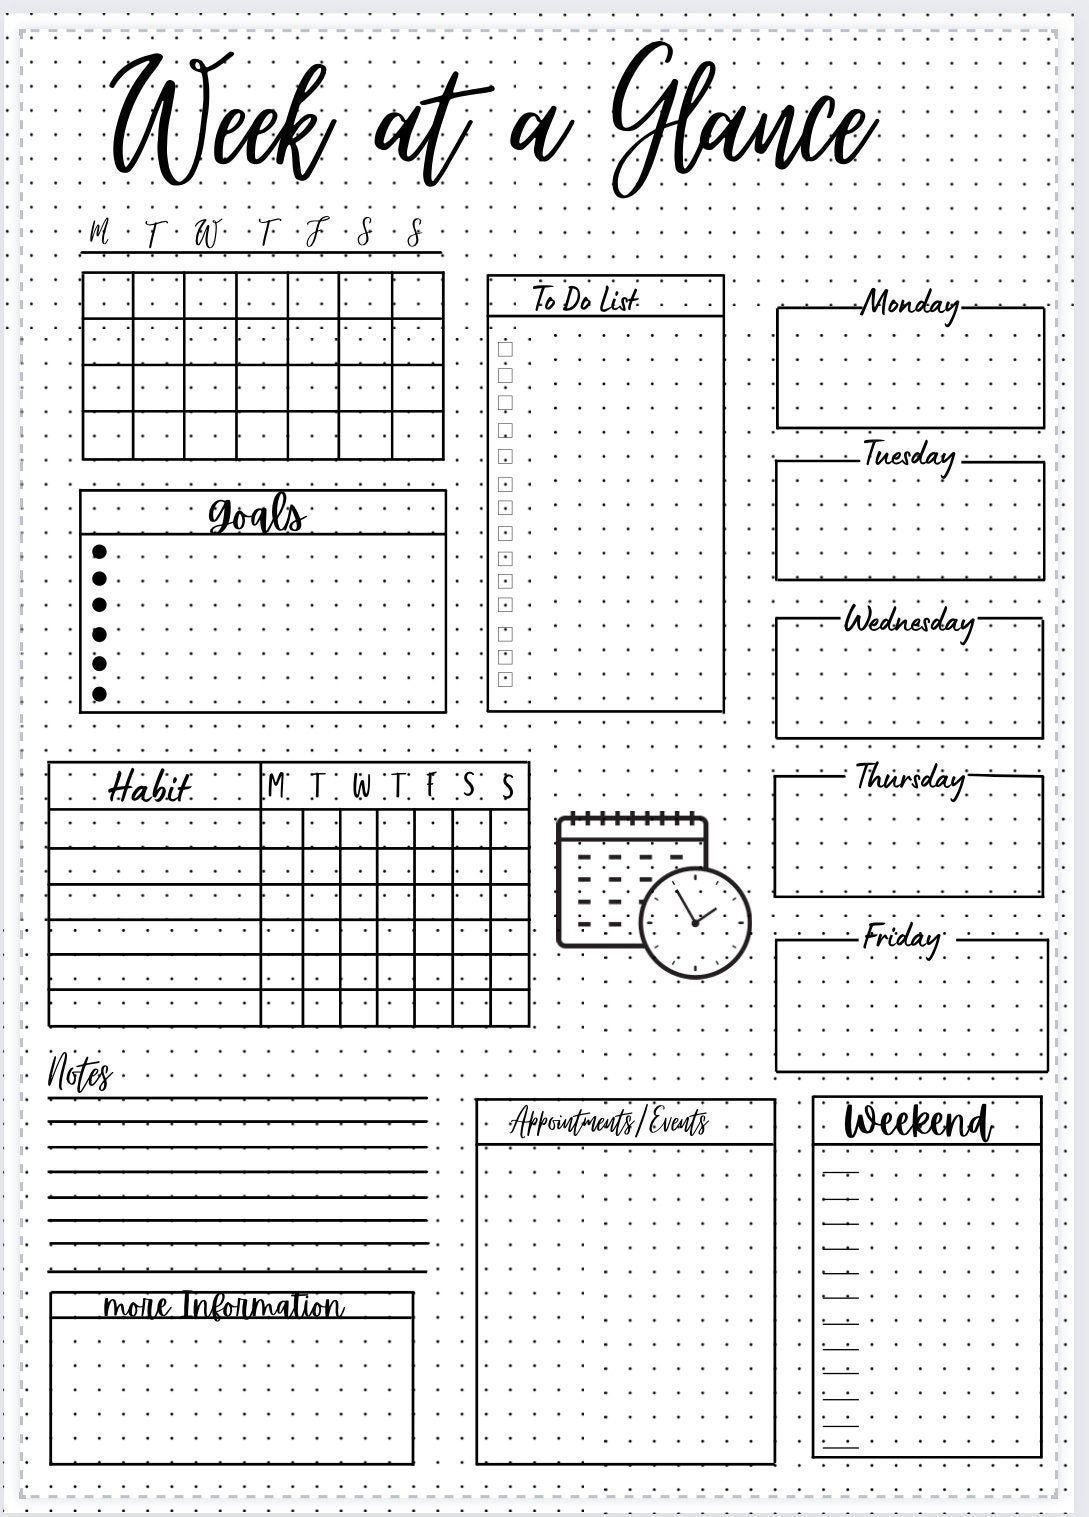 Yearly Agenda Stand Storage Desk Calendar To-do lists Time Planner